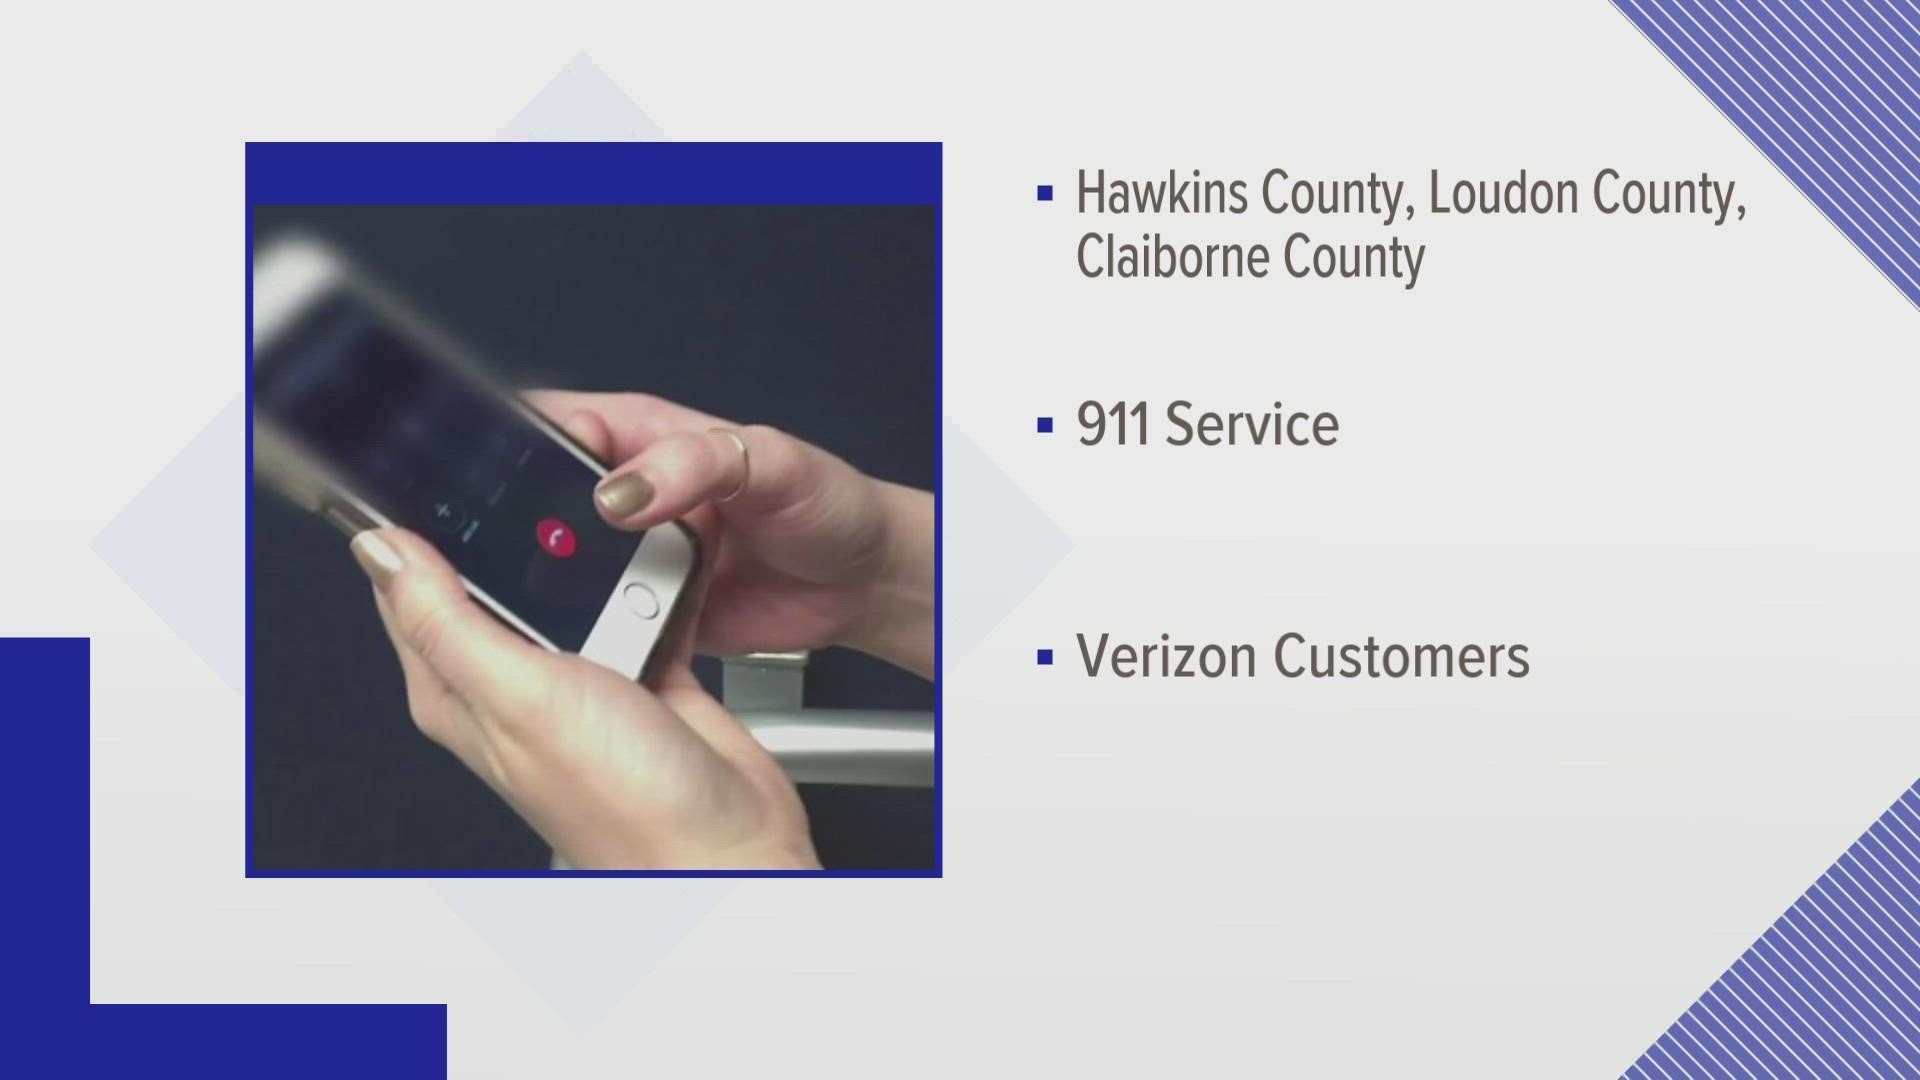 Loudon County dispatchers said Verizon ran tests and determined the issue had been resolved for people experiencing issues calling 911.